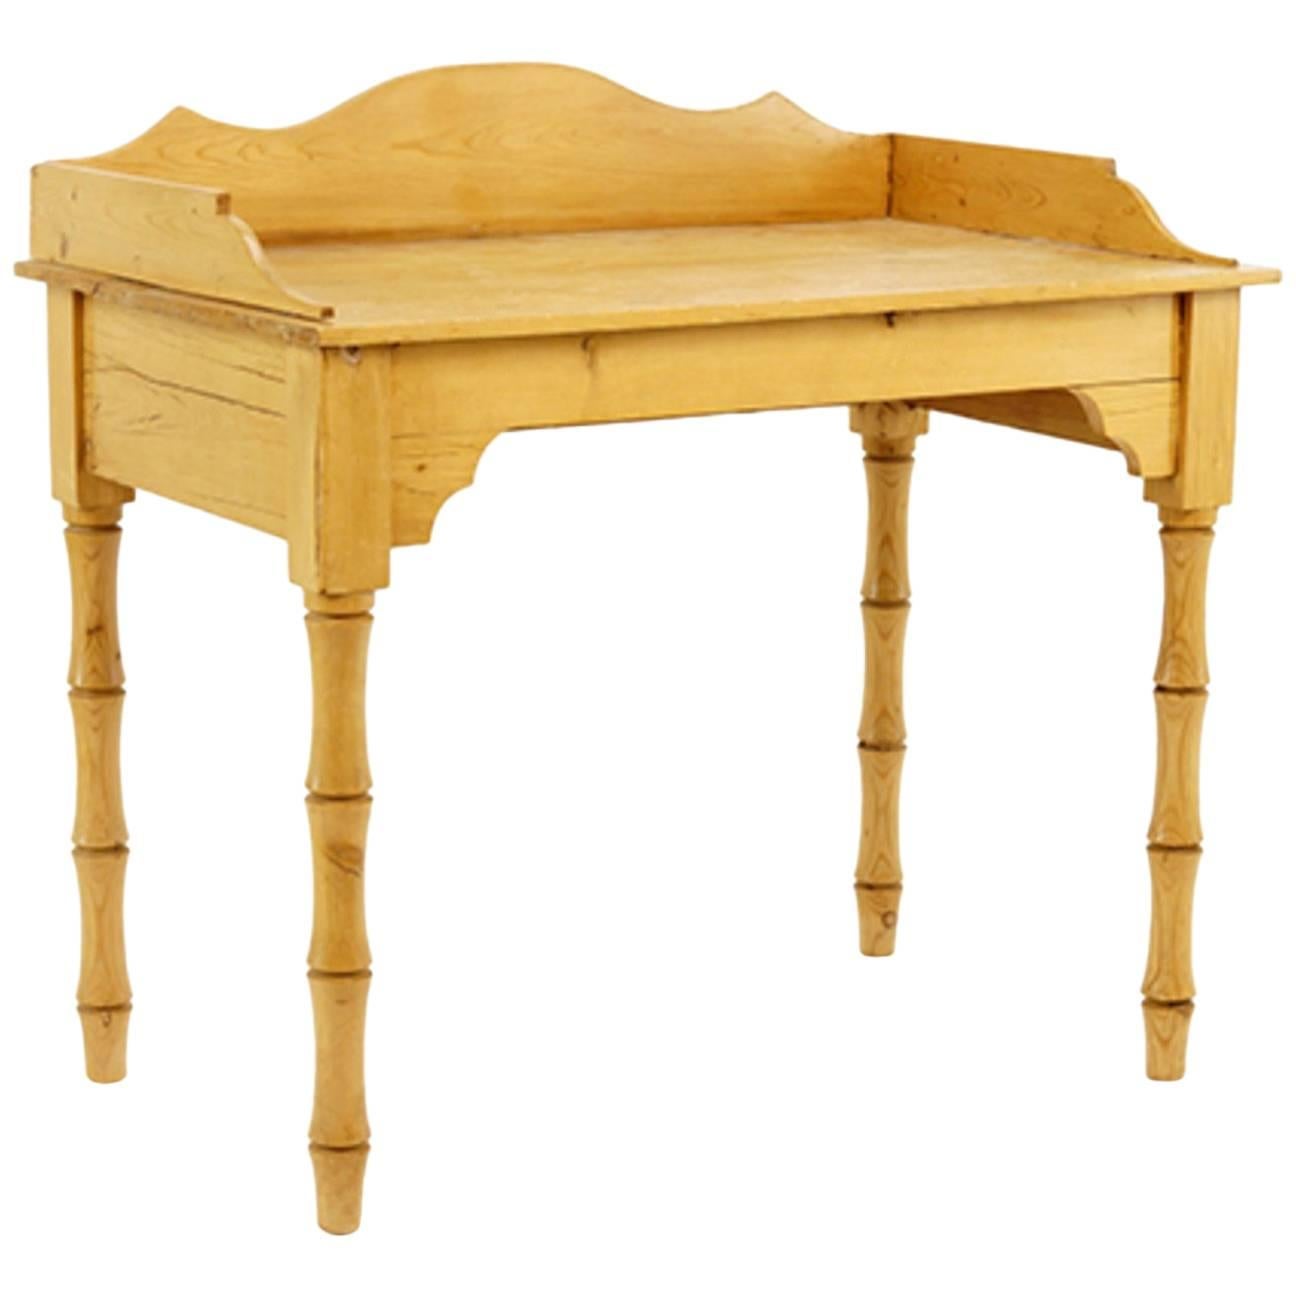 English Pine Console Or Side Table with Decorative Faux Bamboo Leg's. Great Size For Sale